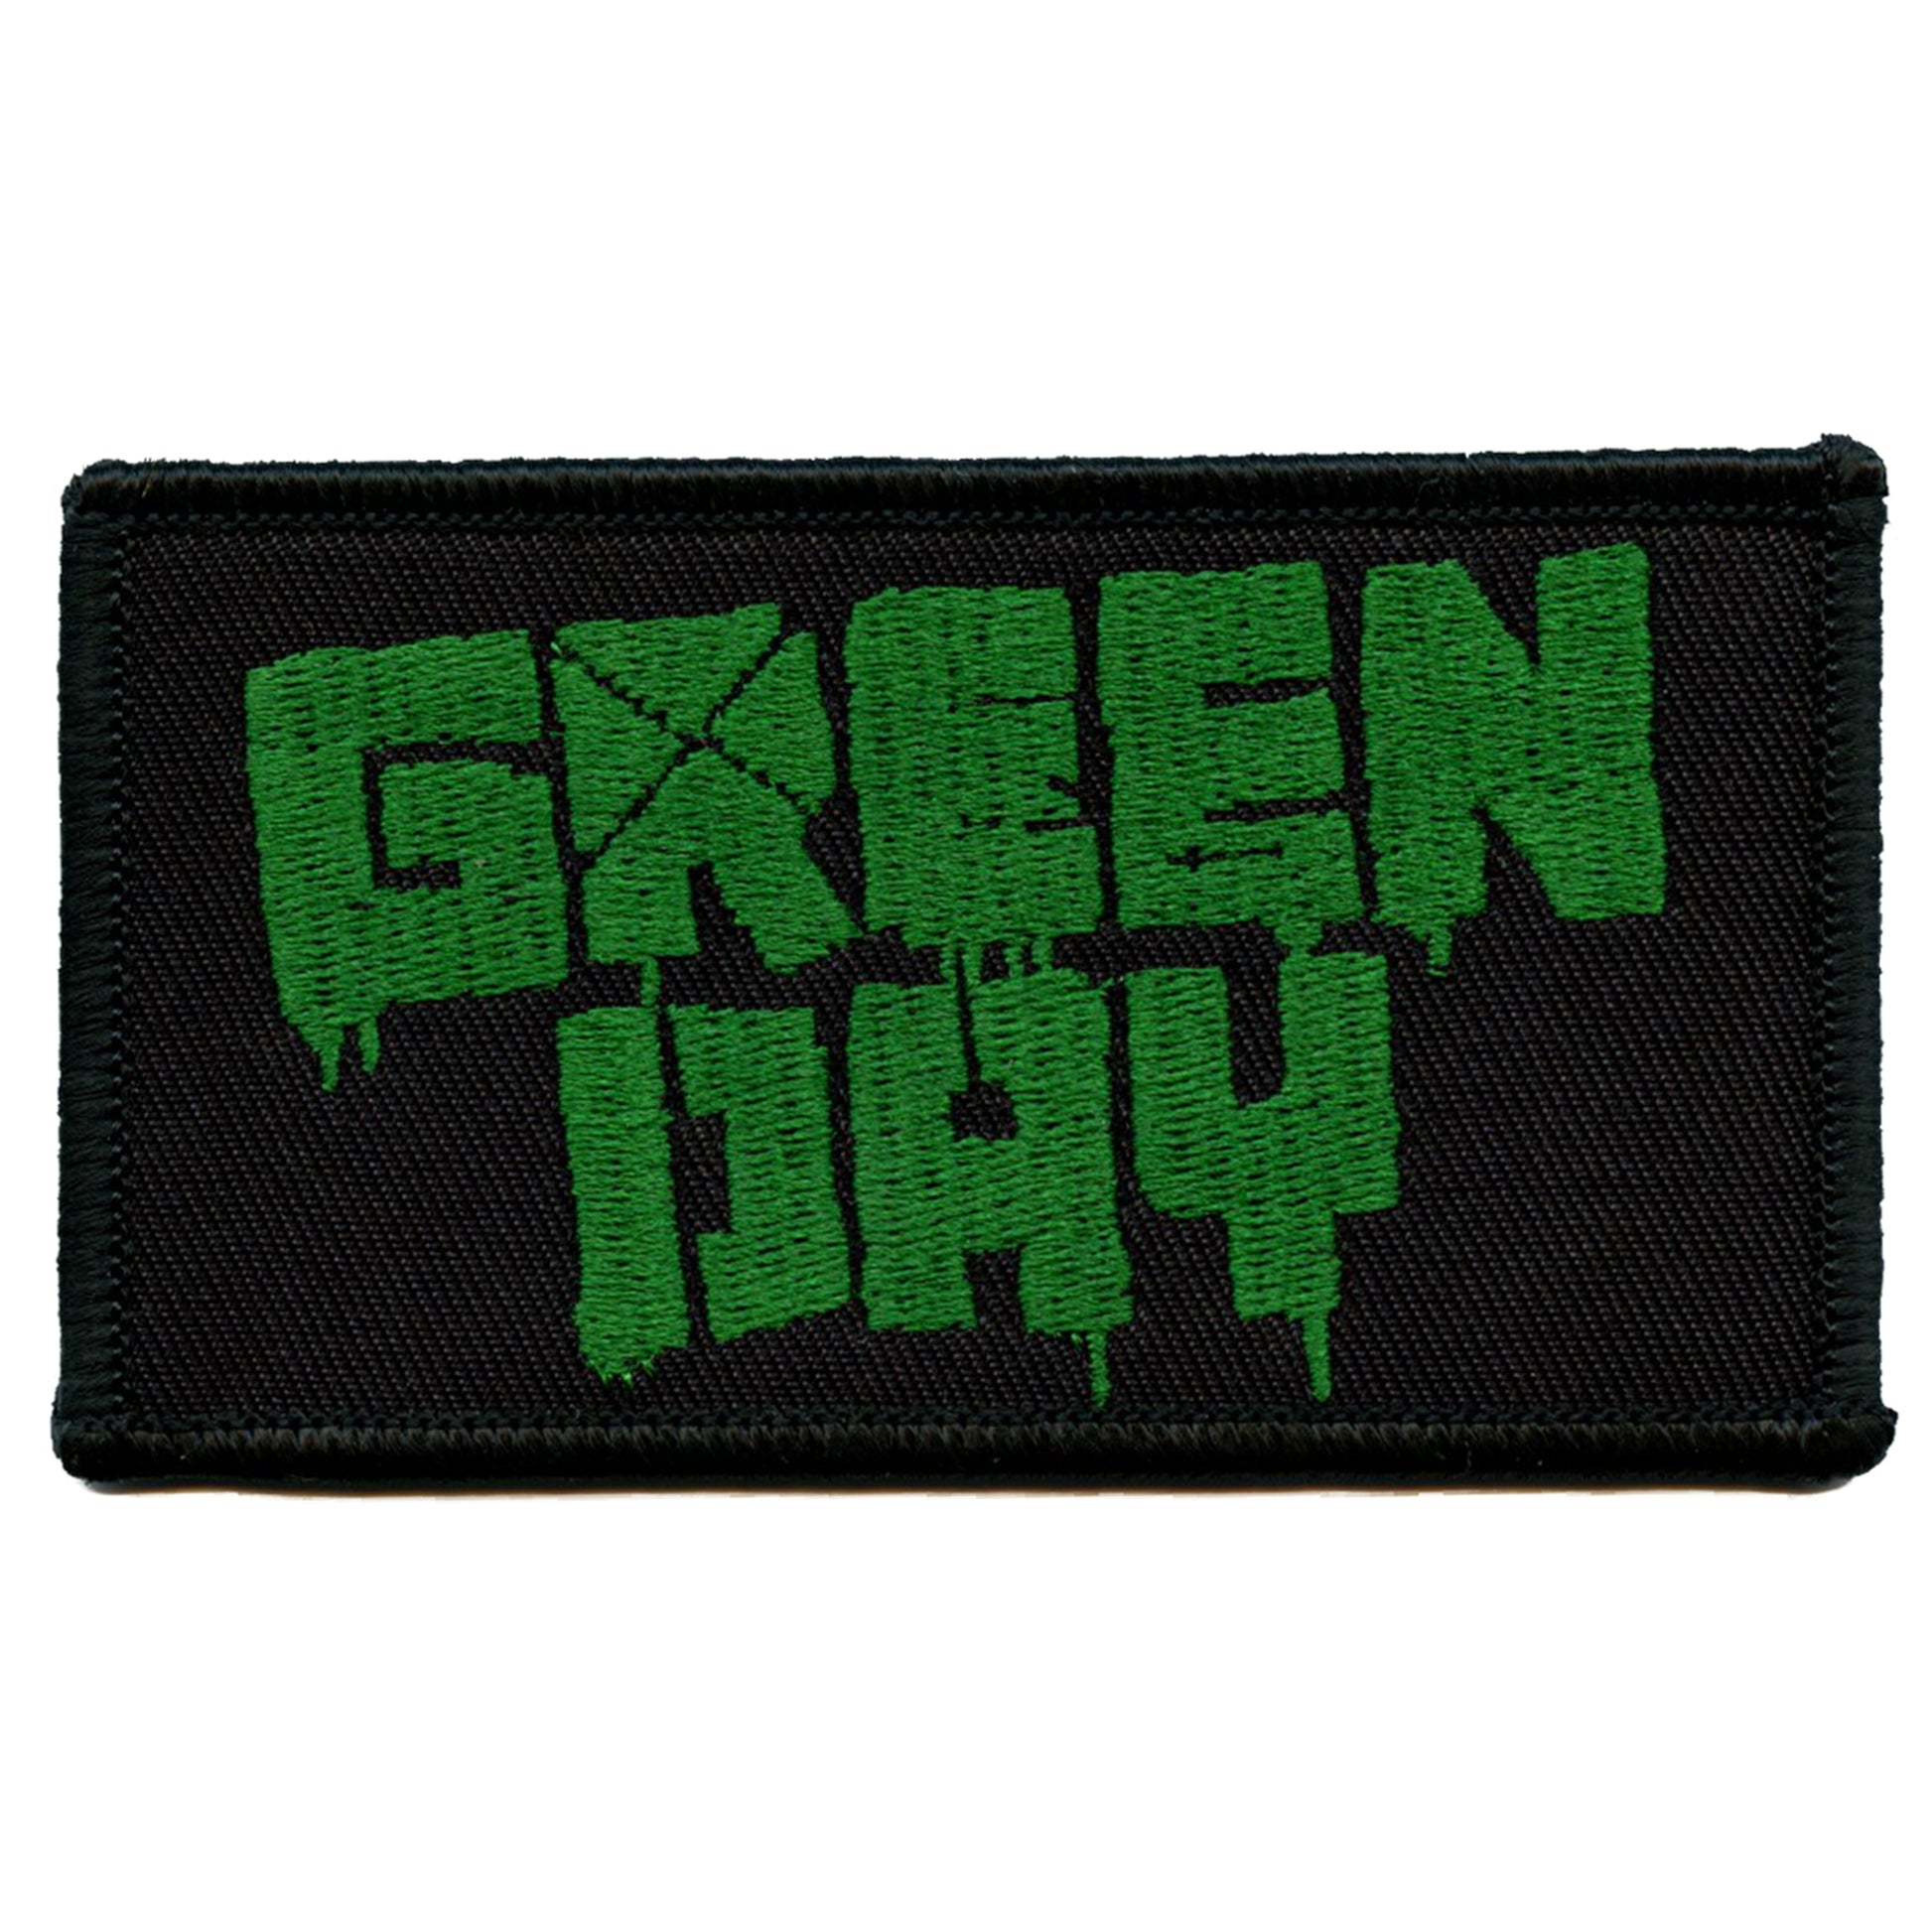 Green Day Spray Paint Logo Patch Punk Rock Band Embroidered Iron On